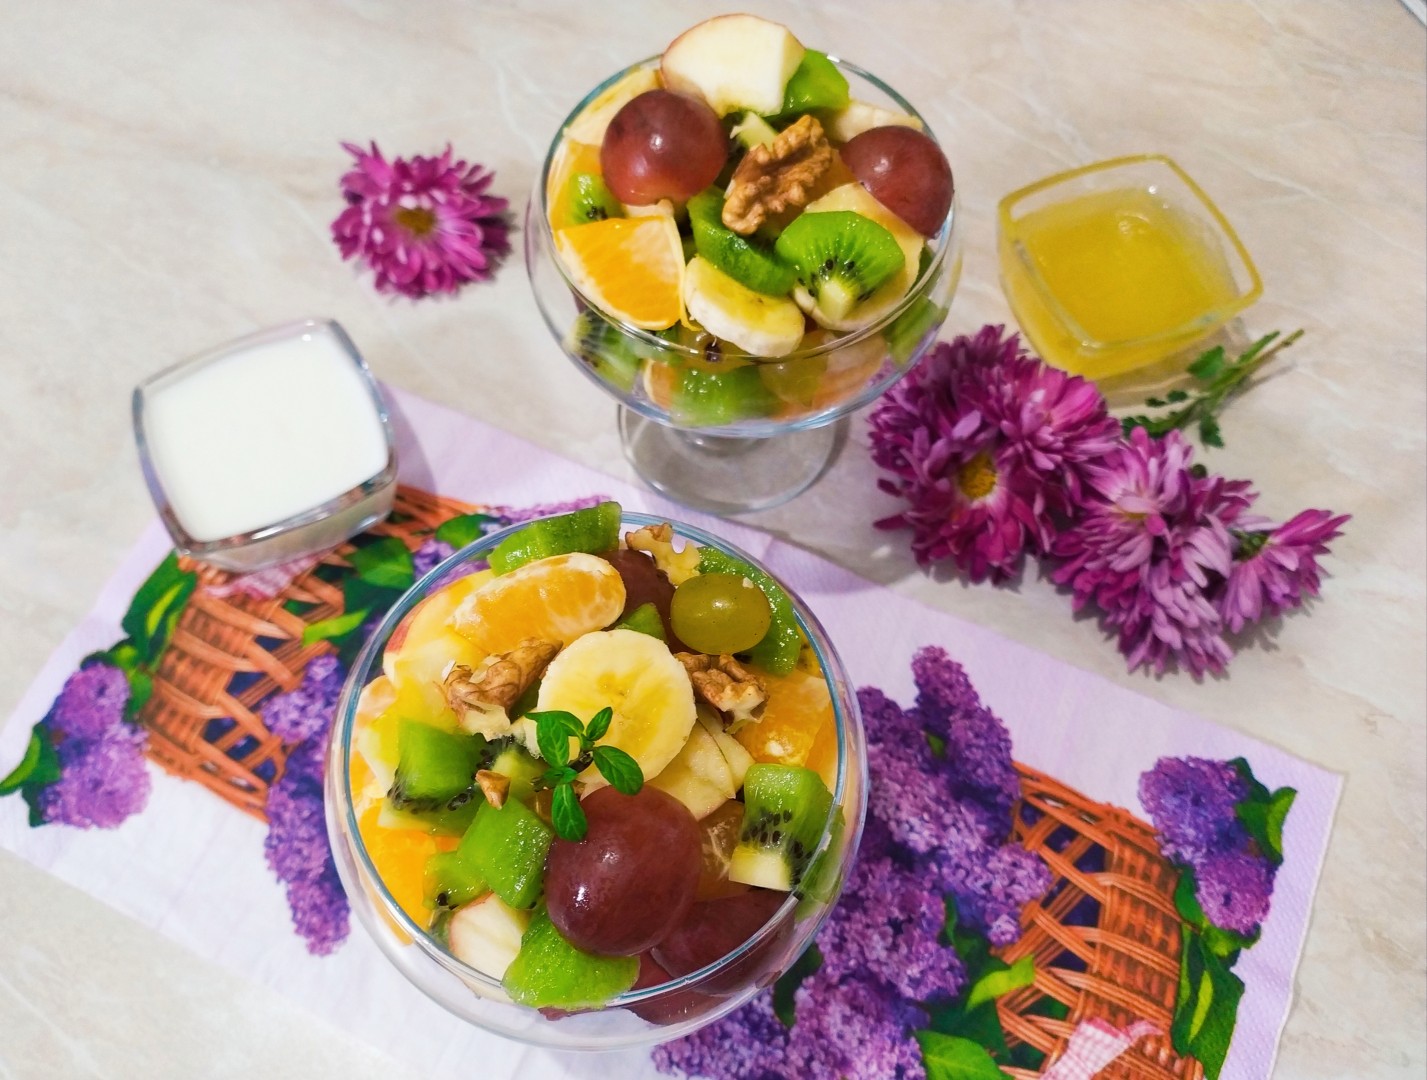  GreenHarvest Fresh: Crafting Delicious Fruit Salads and Snacks for a Healthy Lifestyle